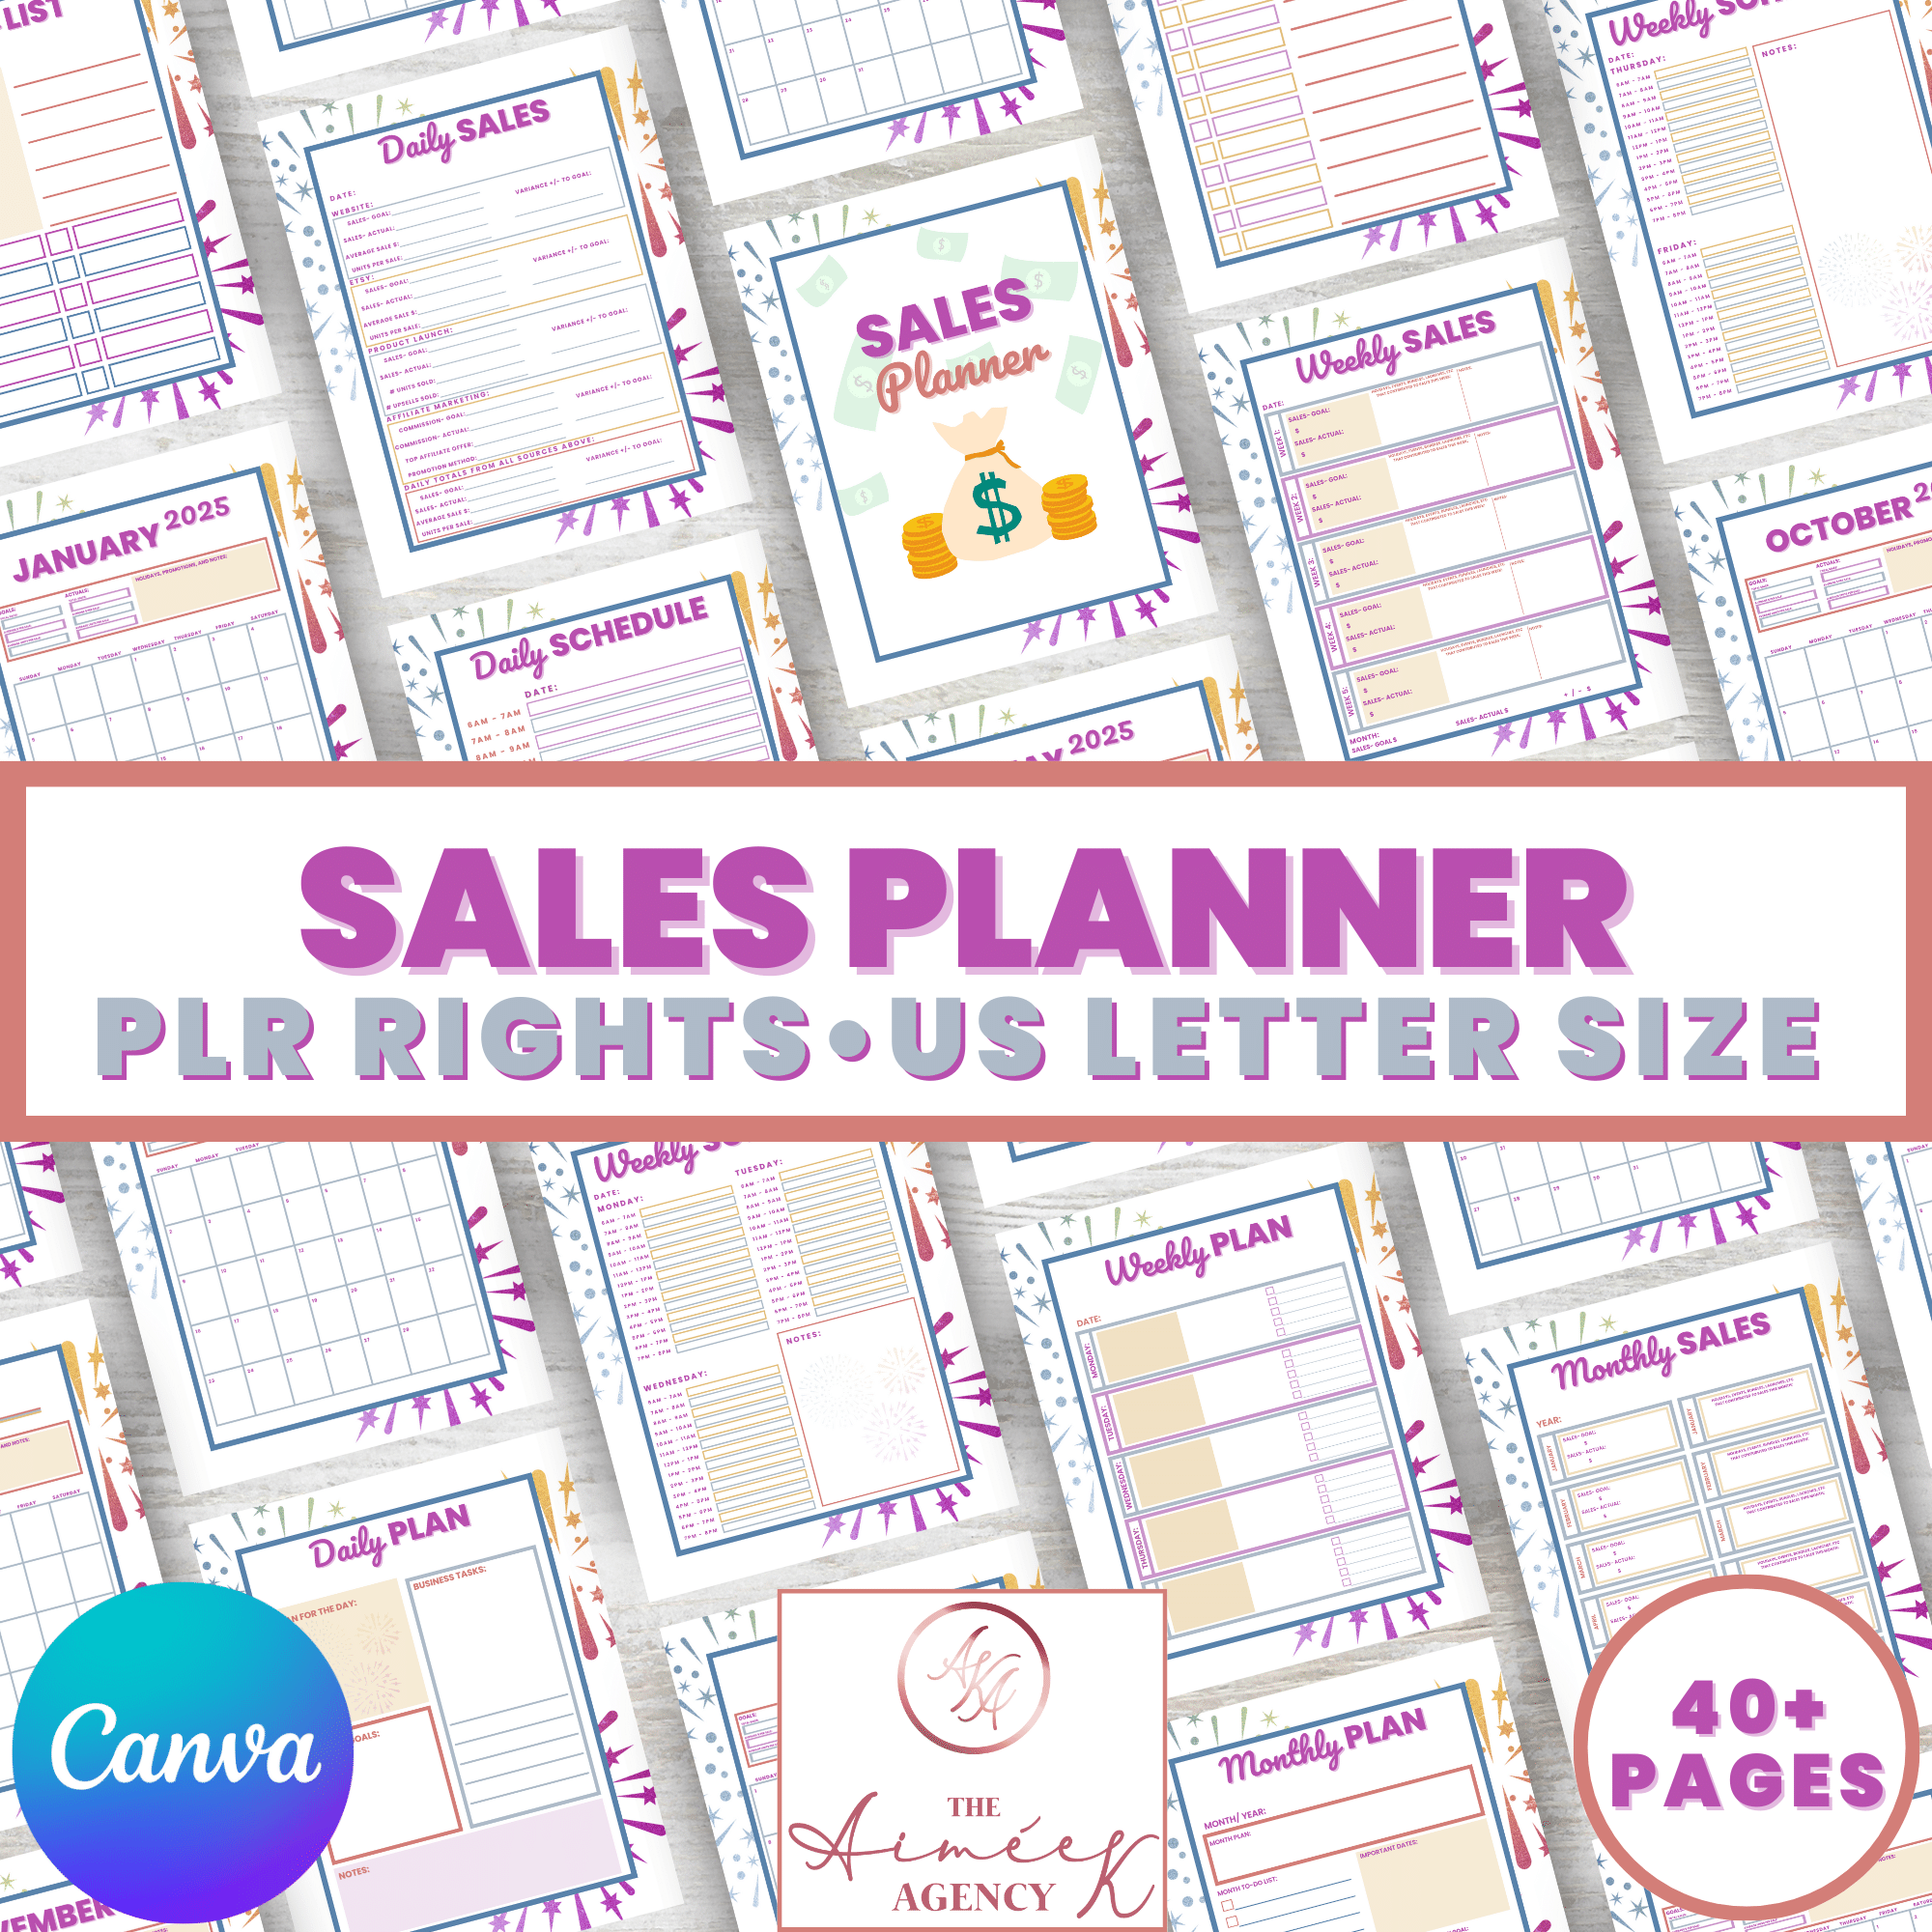 Sales Planner with PLR License in US letter size. 40+ pages of Canva templates